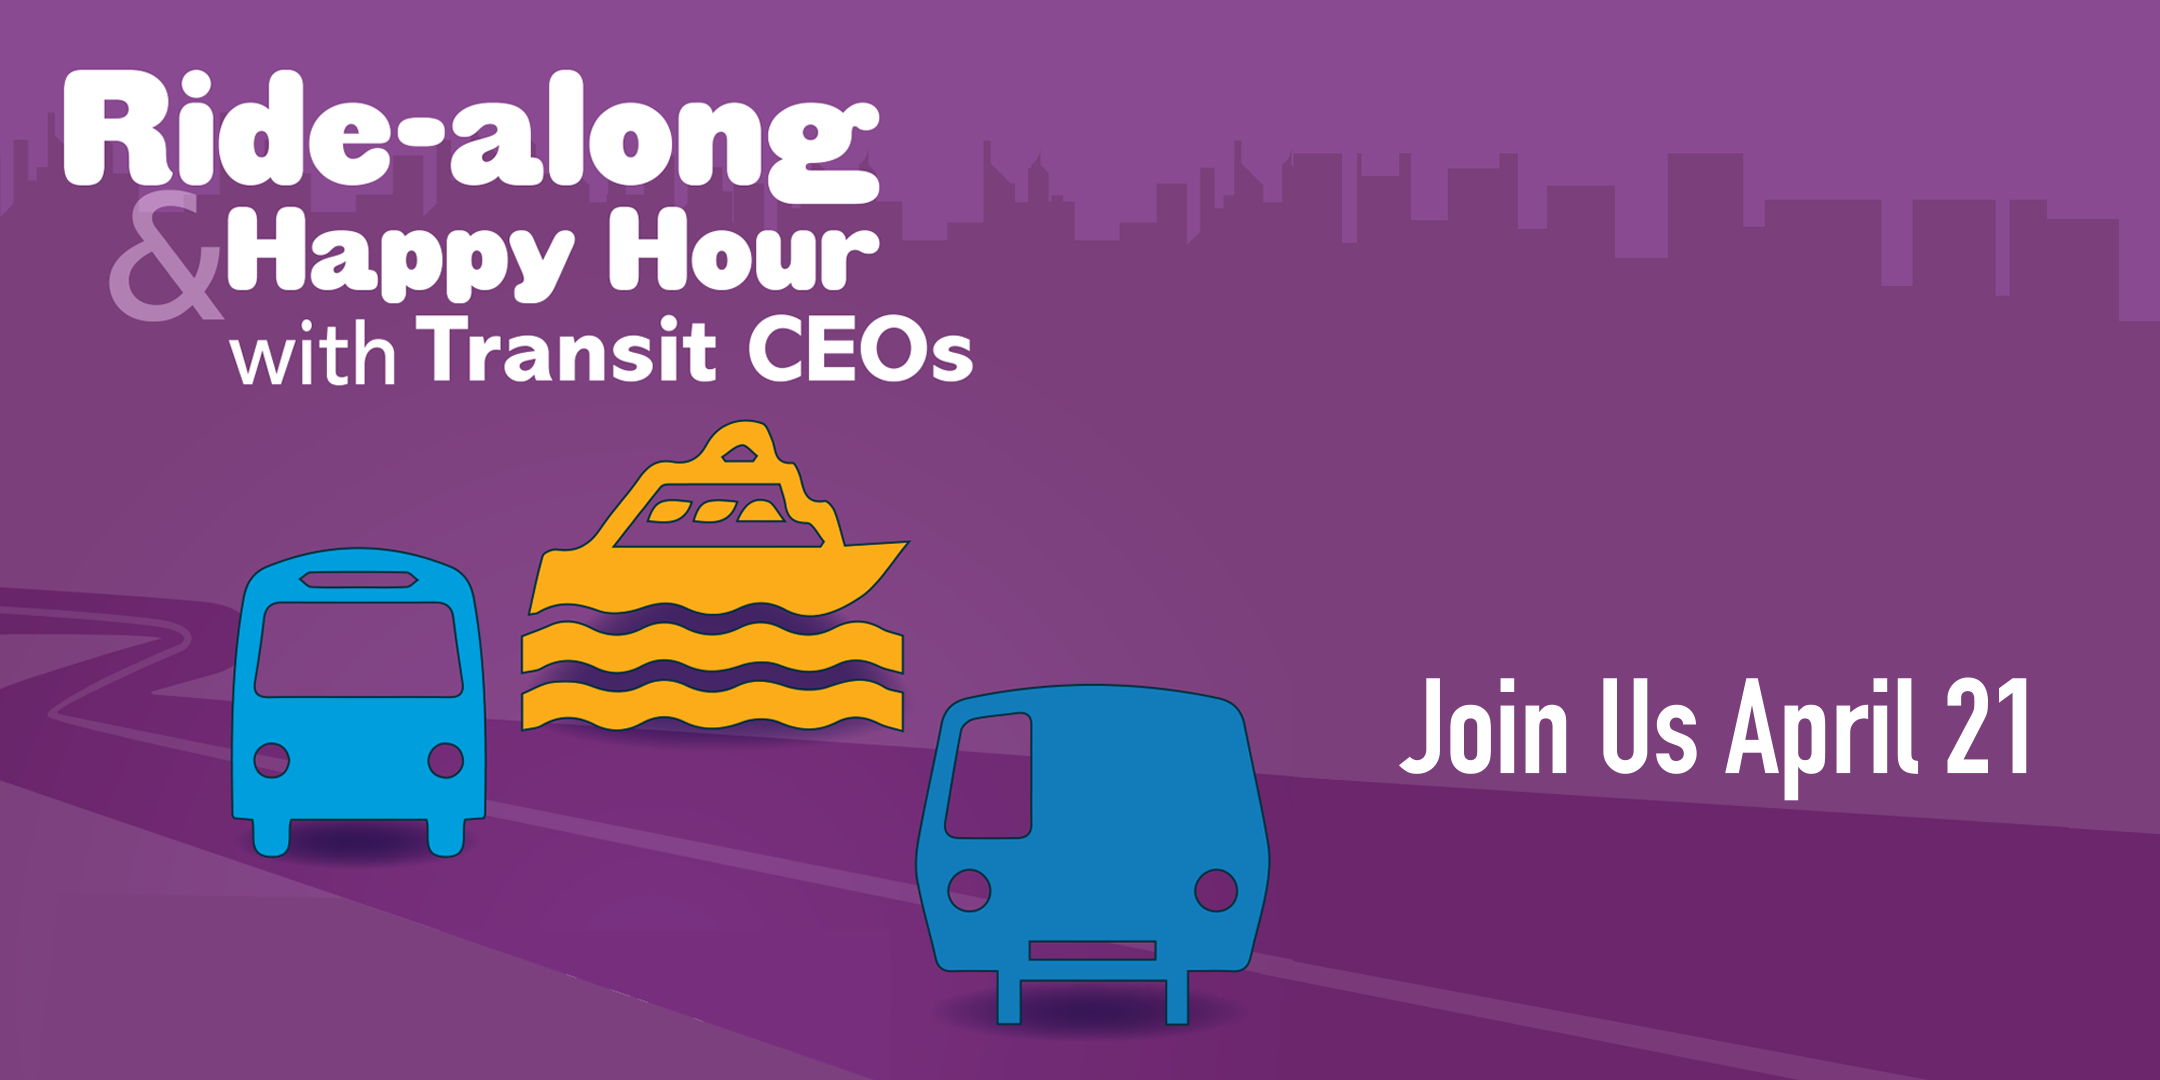 Ride-along & Happy Hour with Transit CEOs